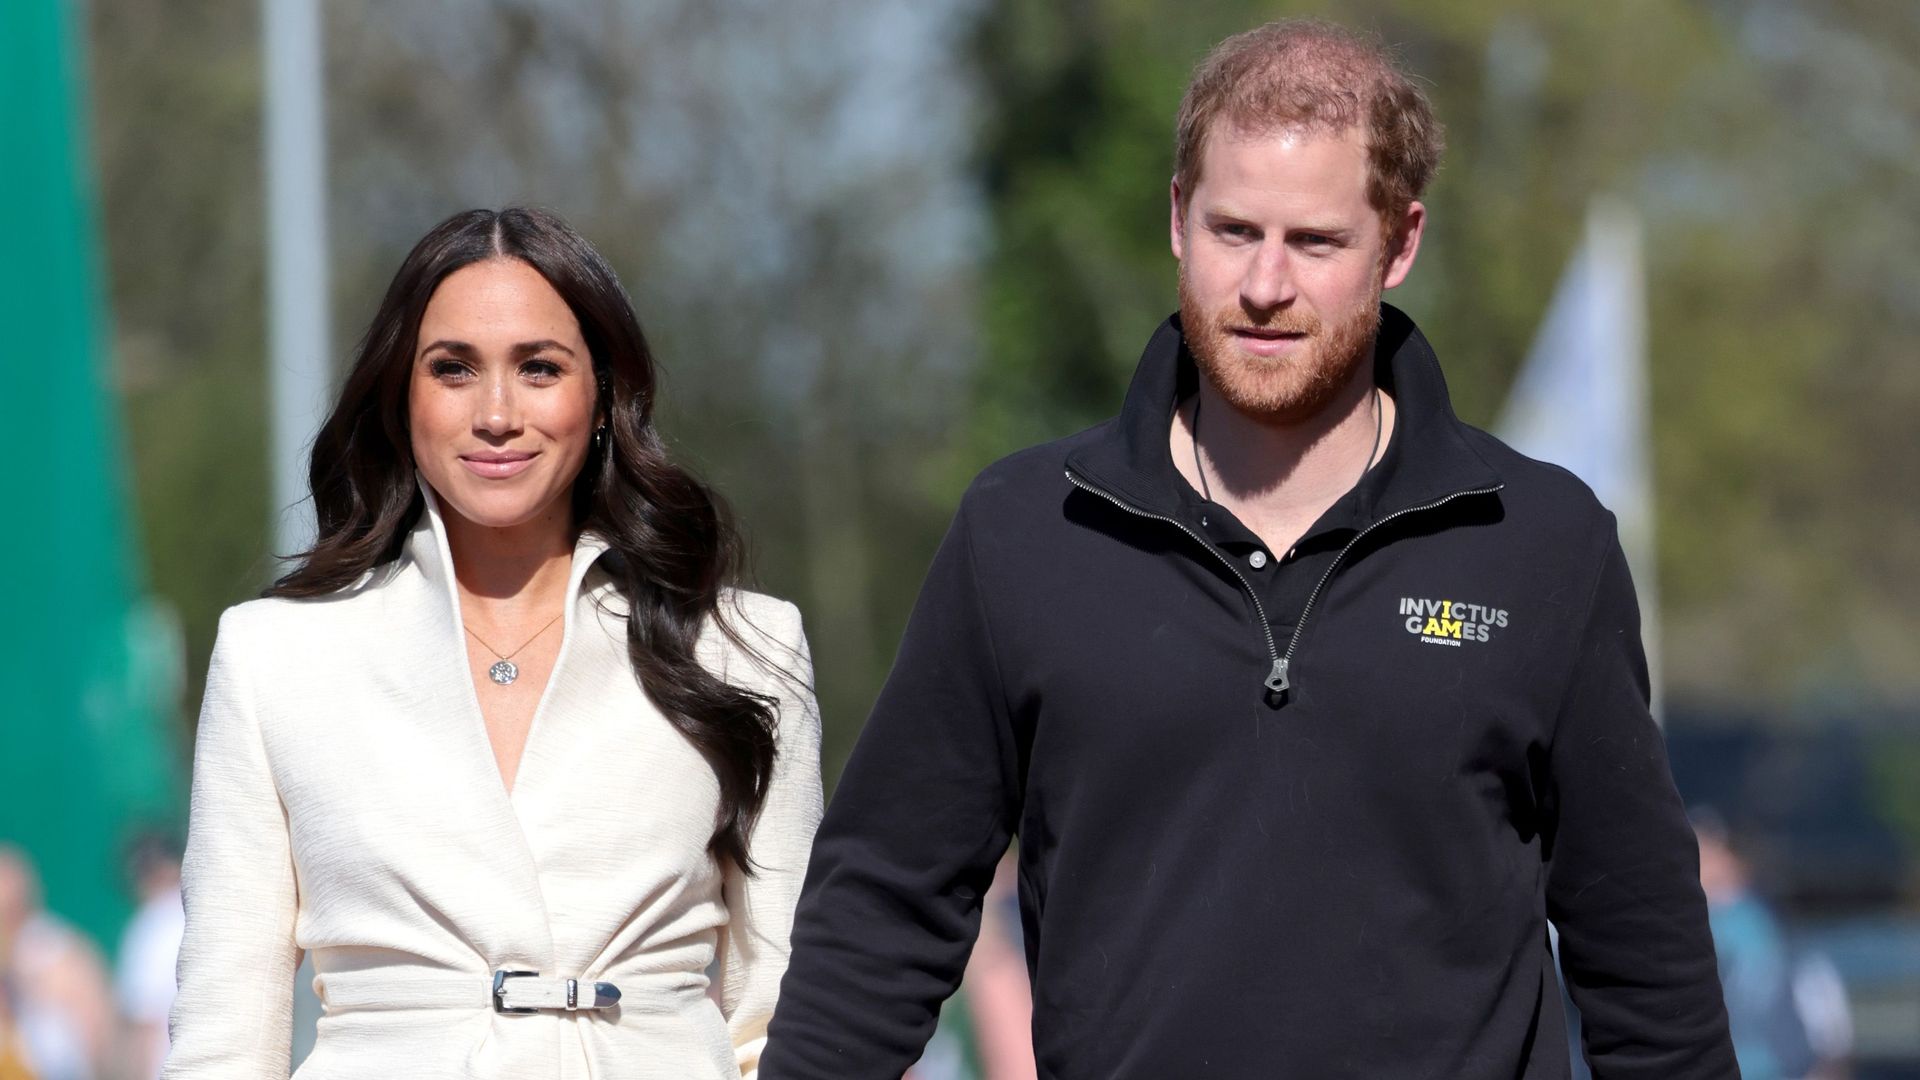 Meghan Markle confirms trip to Nigeria with husband Harry after his return to London